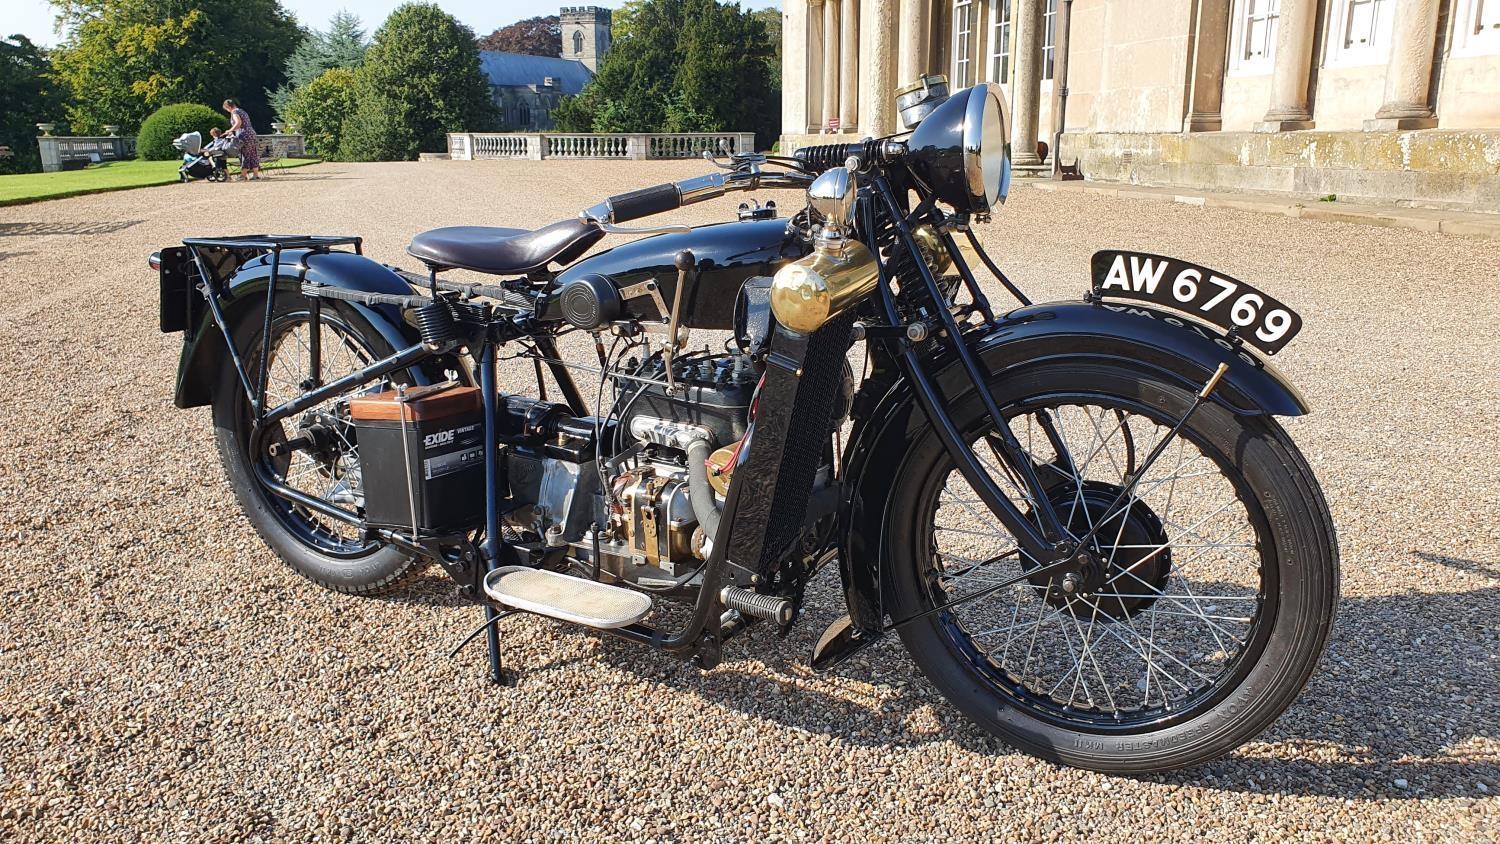 1929 Shaw Special, 10.5 hp. Registration number AW 6769. Frame number 3534083 (ABC). Engine number